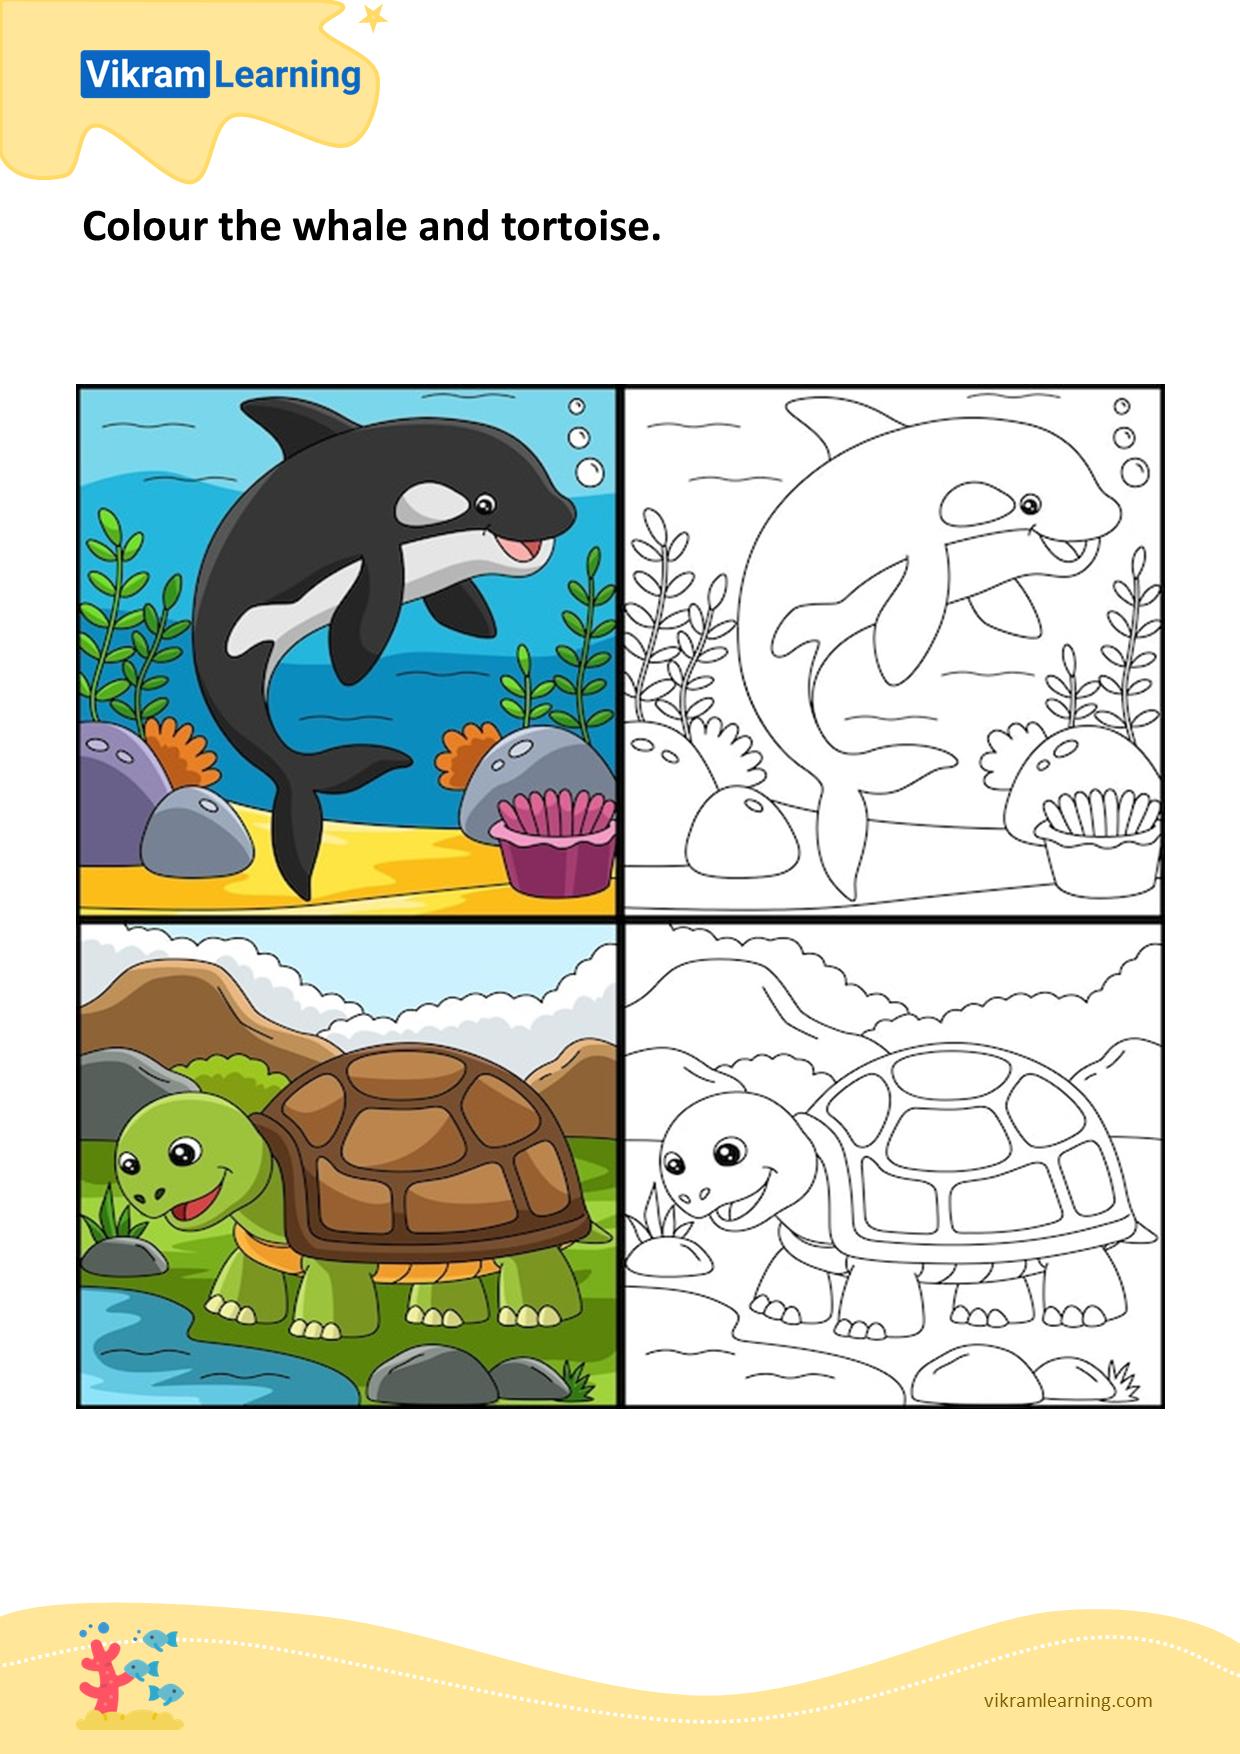 Download colour the whale and tortoise worksheets